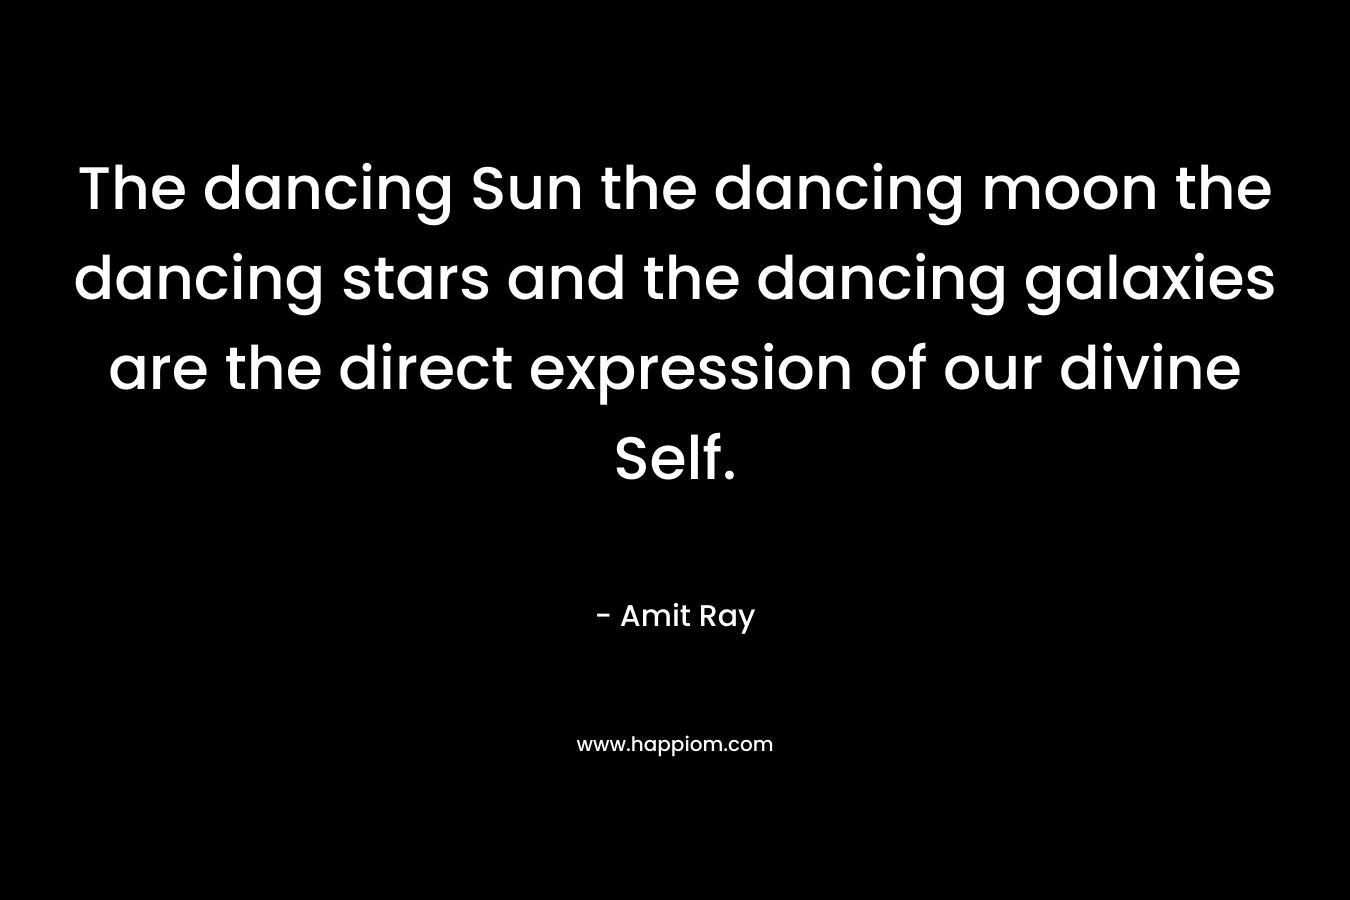 The dancing Sun the dancing moon the dancing stars and the dancing galaxies are the direct expression of our divine Self.